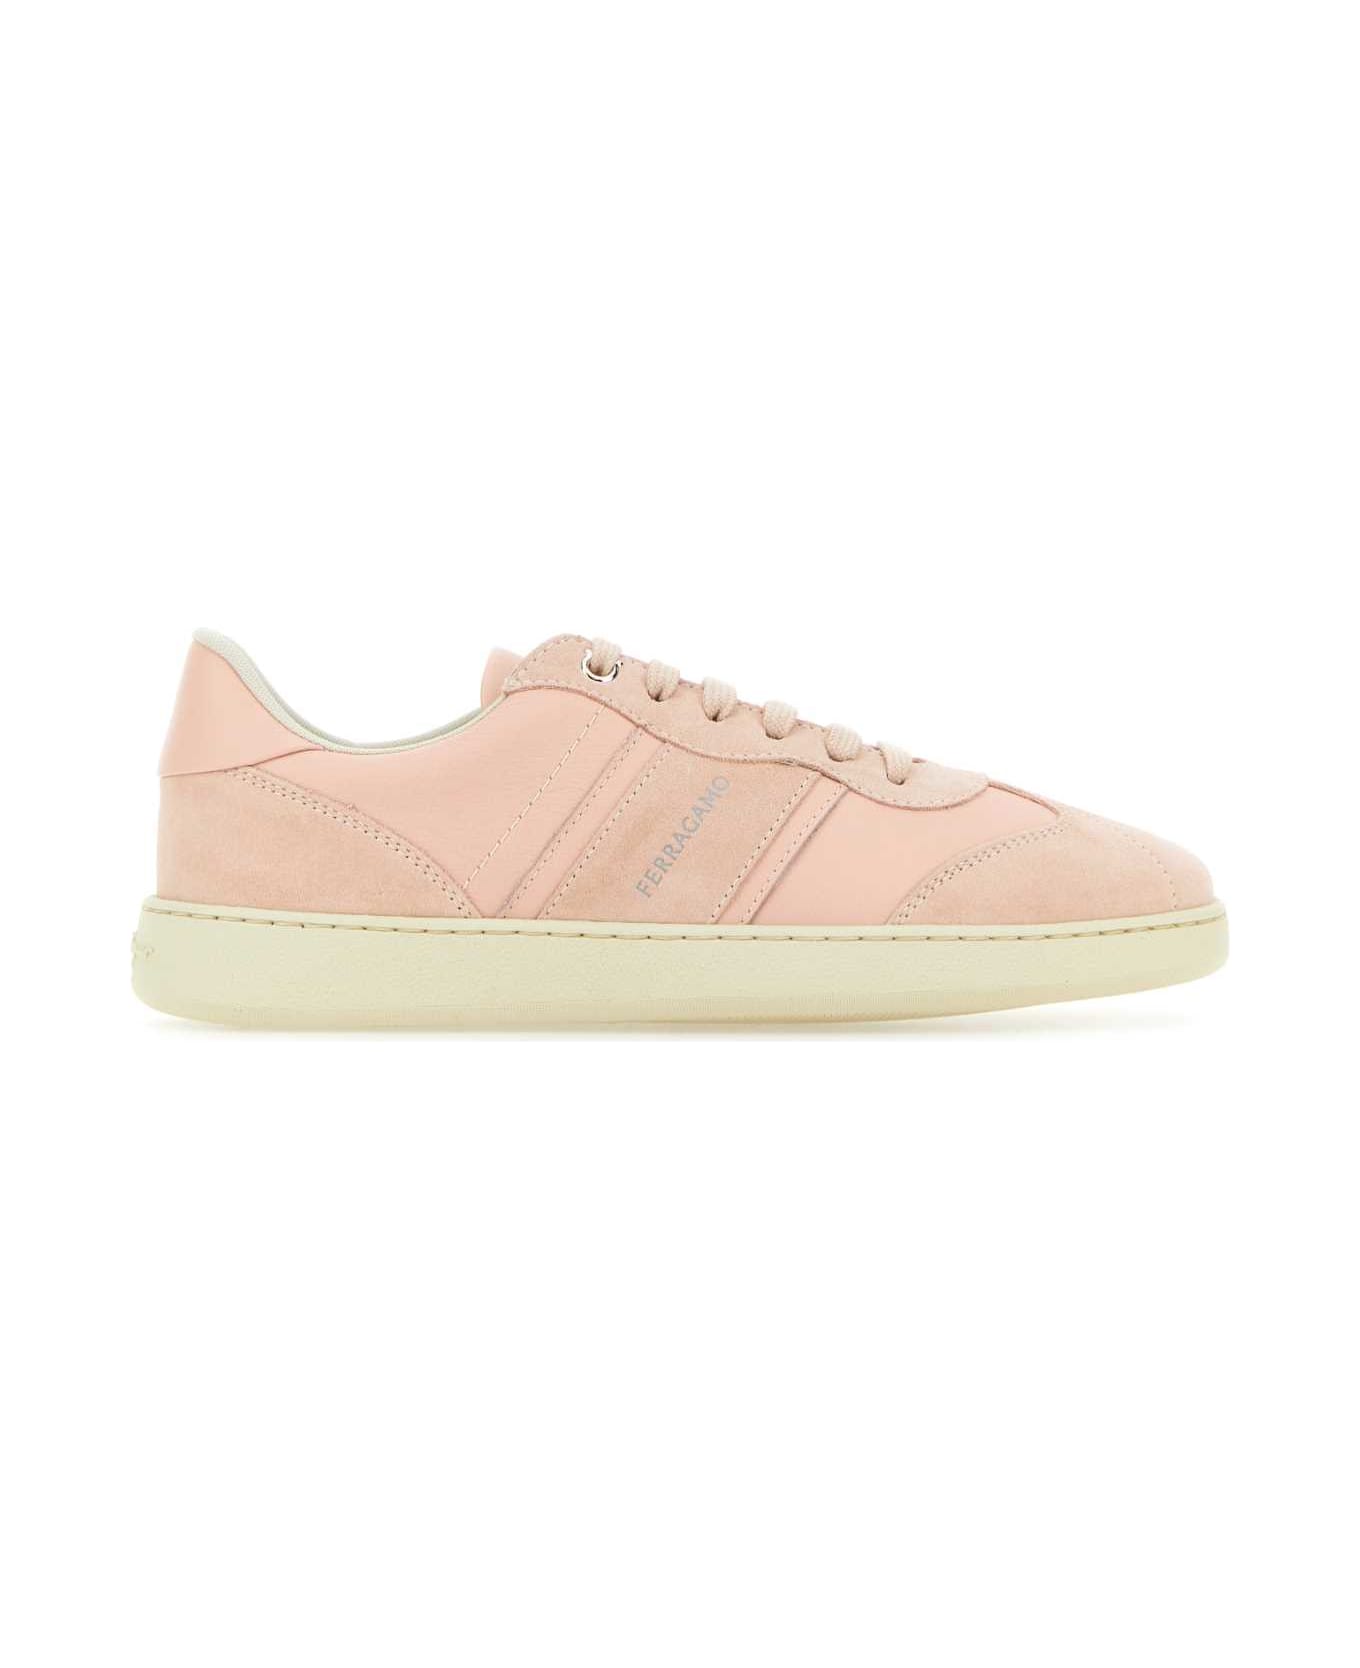 Ferragamo Pink Leather Sneakers - NYLUNDPINK スニーカー